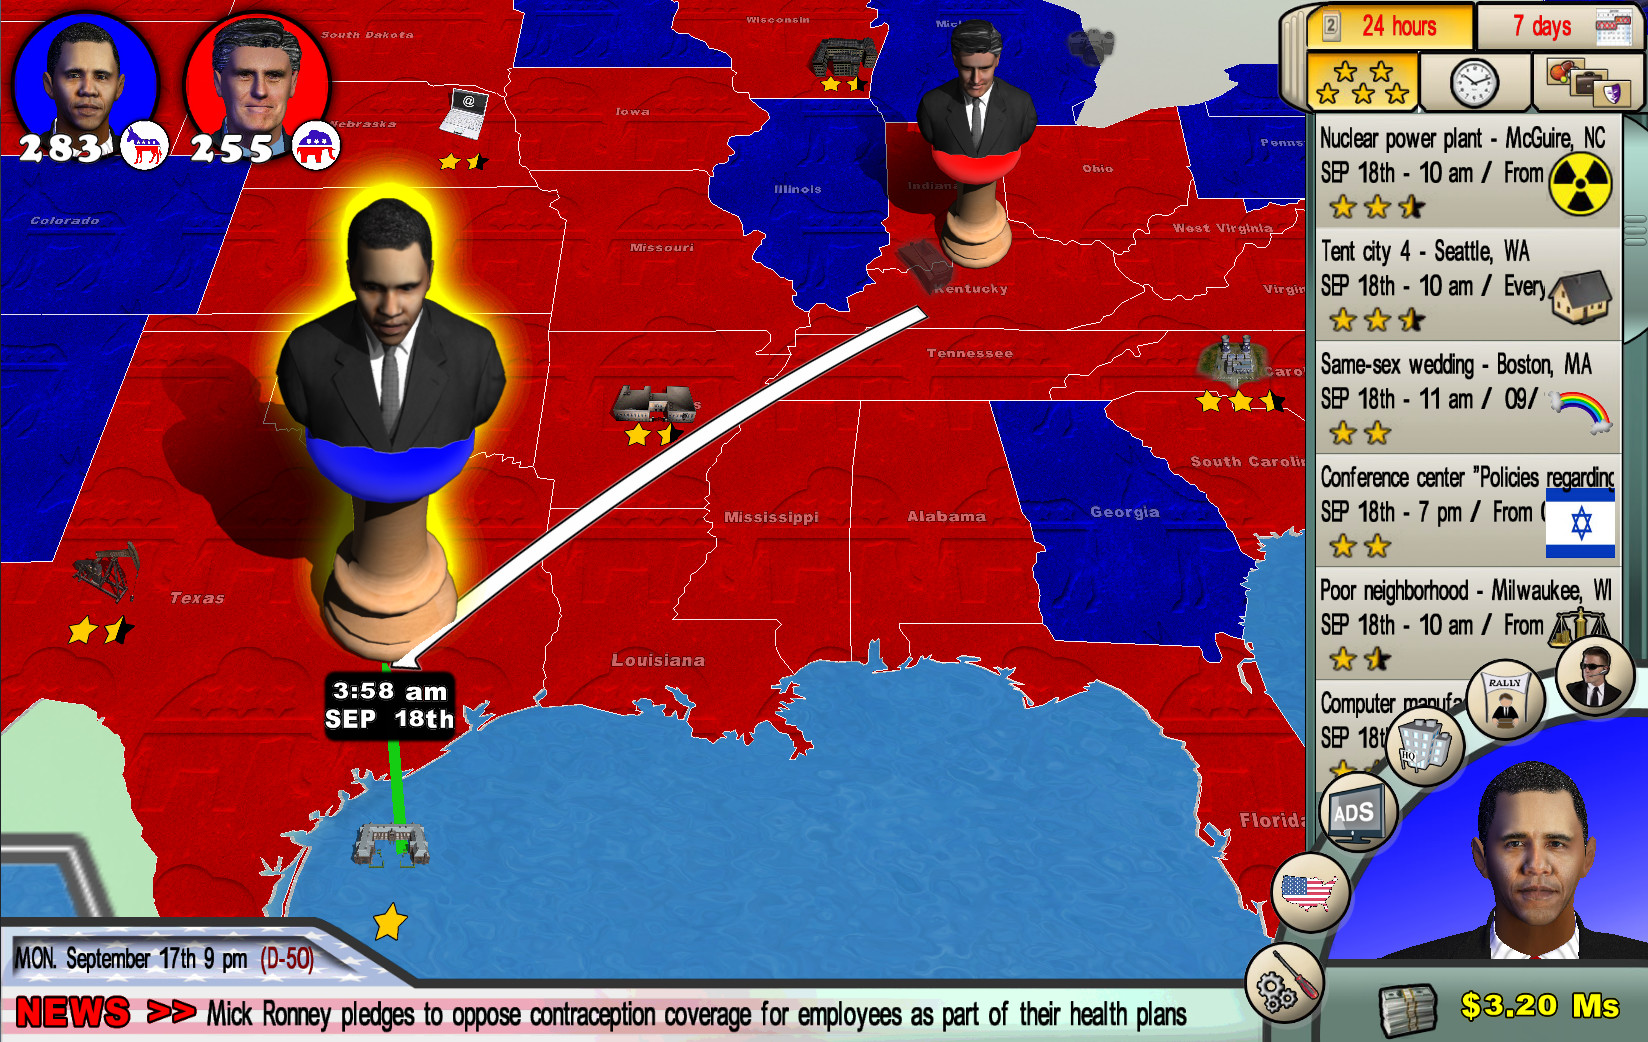 The Race for the White House screenshot